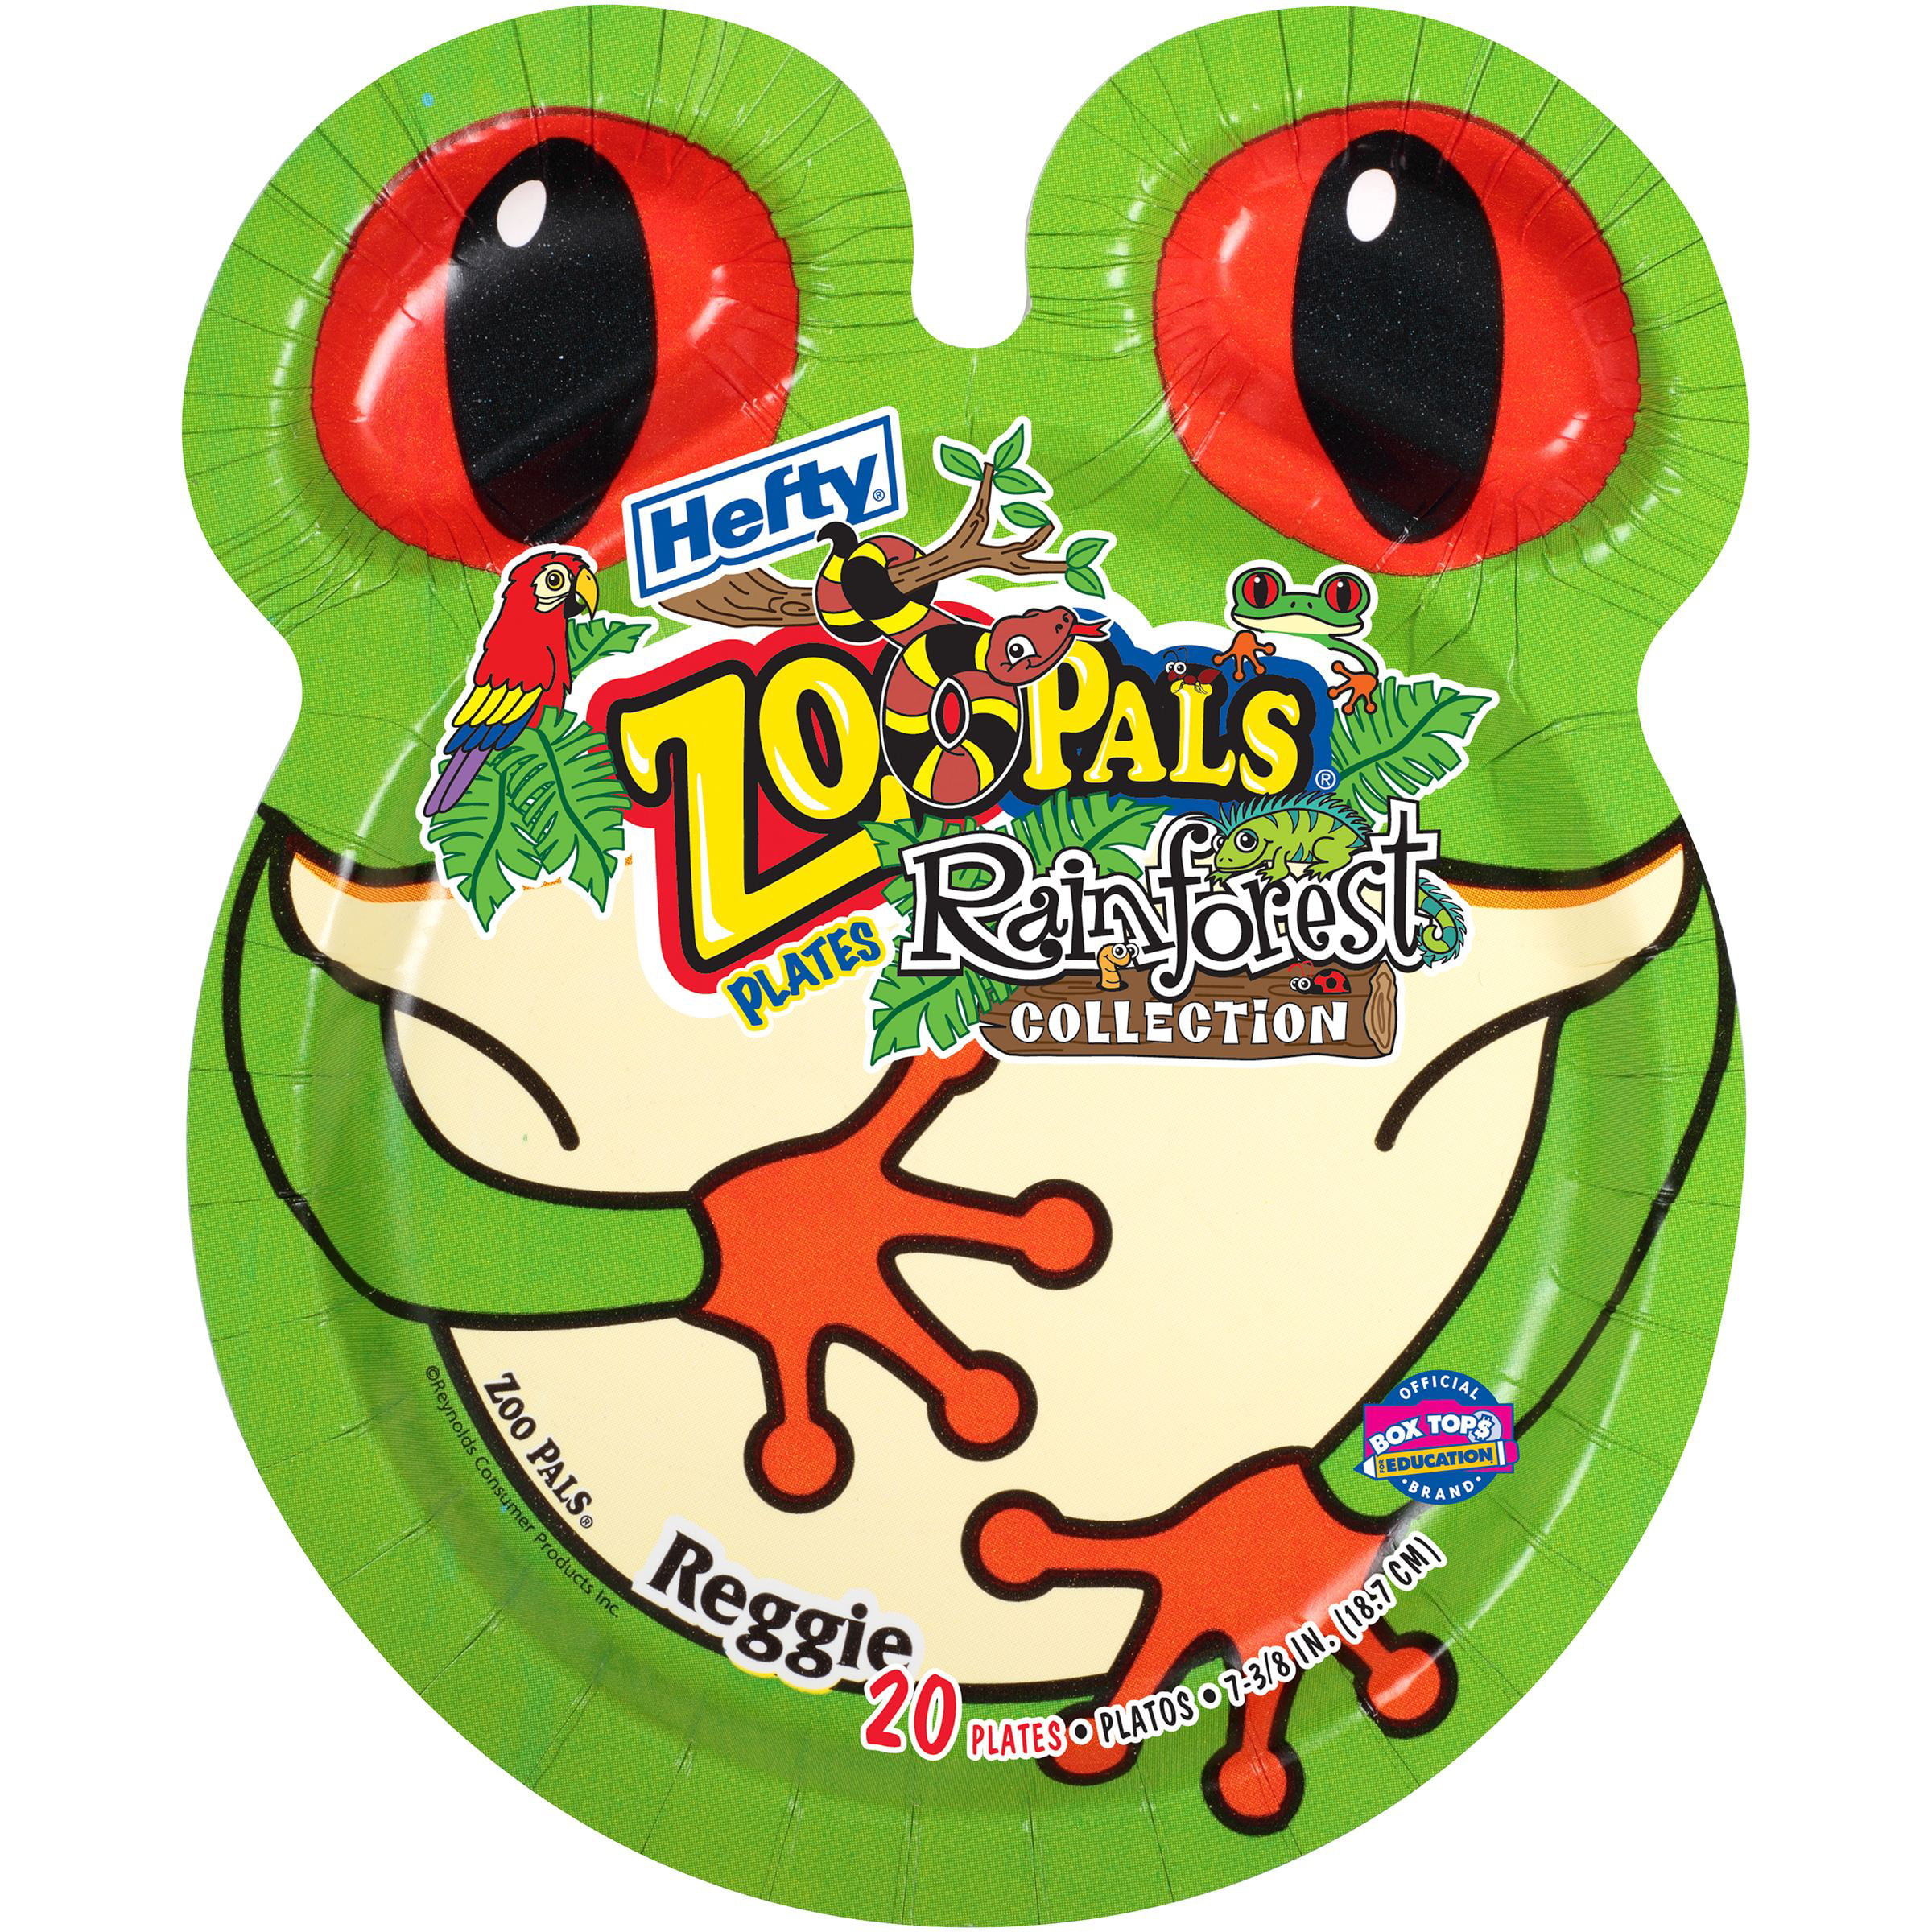 The kid-favorite Hefty Zoo Pals plates are back in stock on